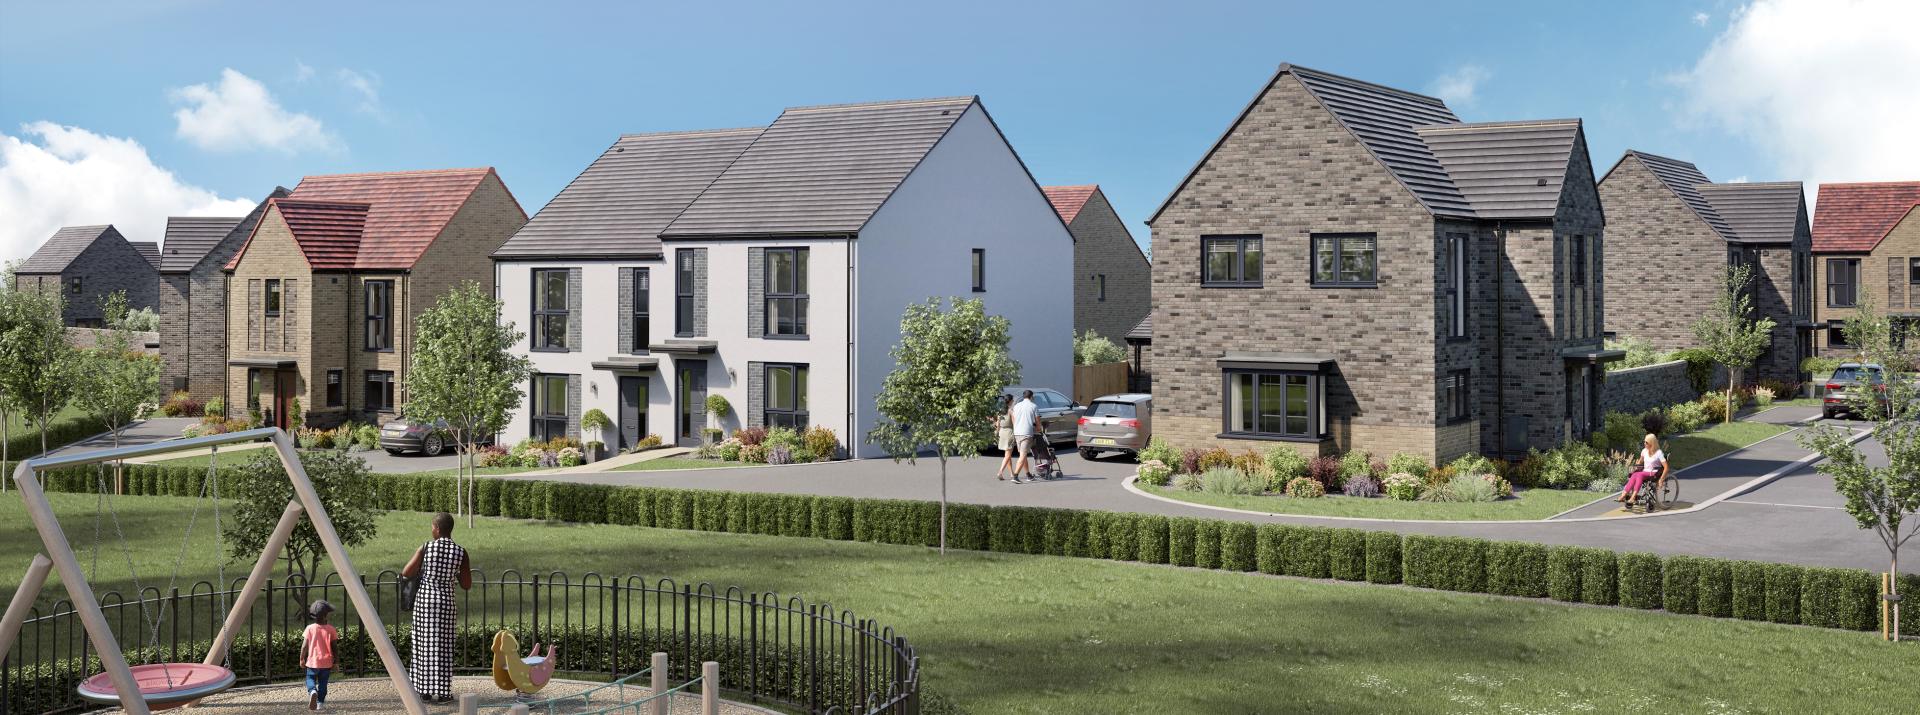 A computer generated image of what the new housing development at Winterstoke Gate, Locking Parklands, Weston-super-Mare may look like when finished.